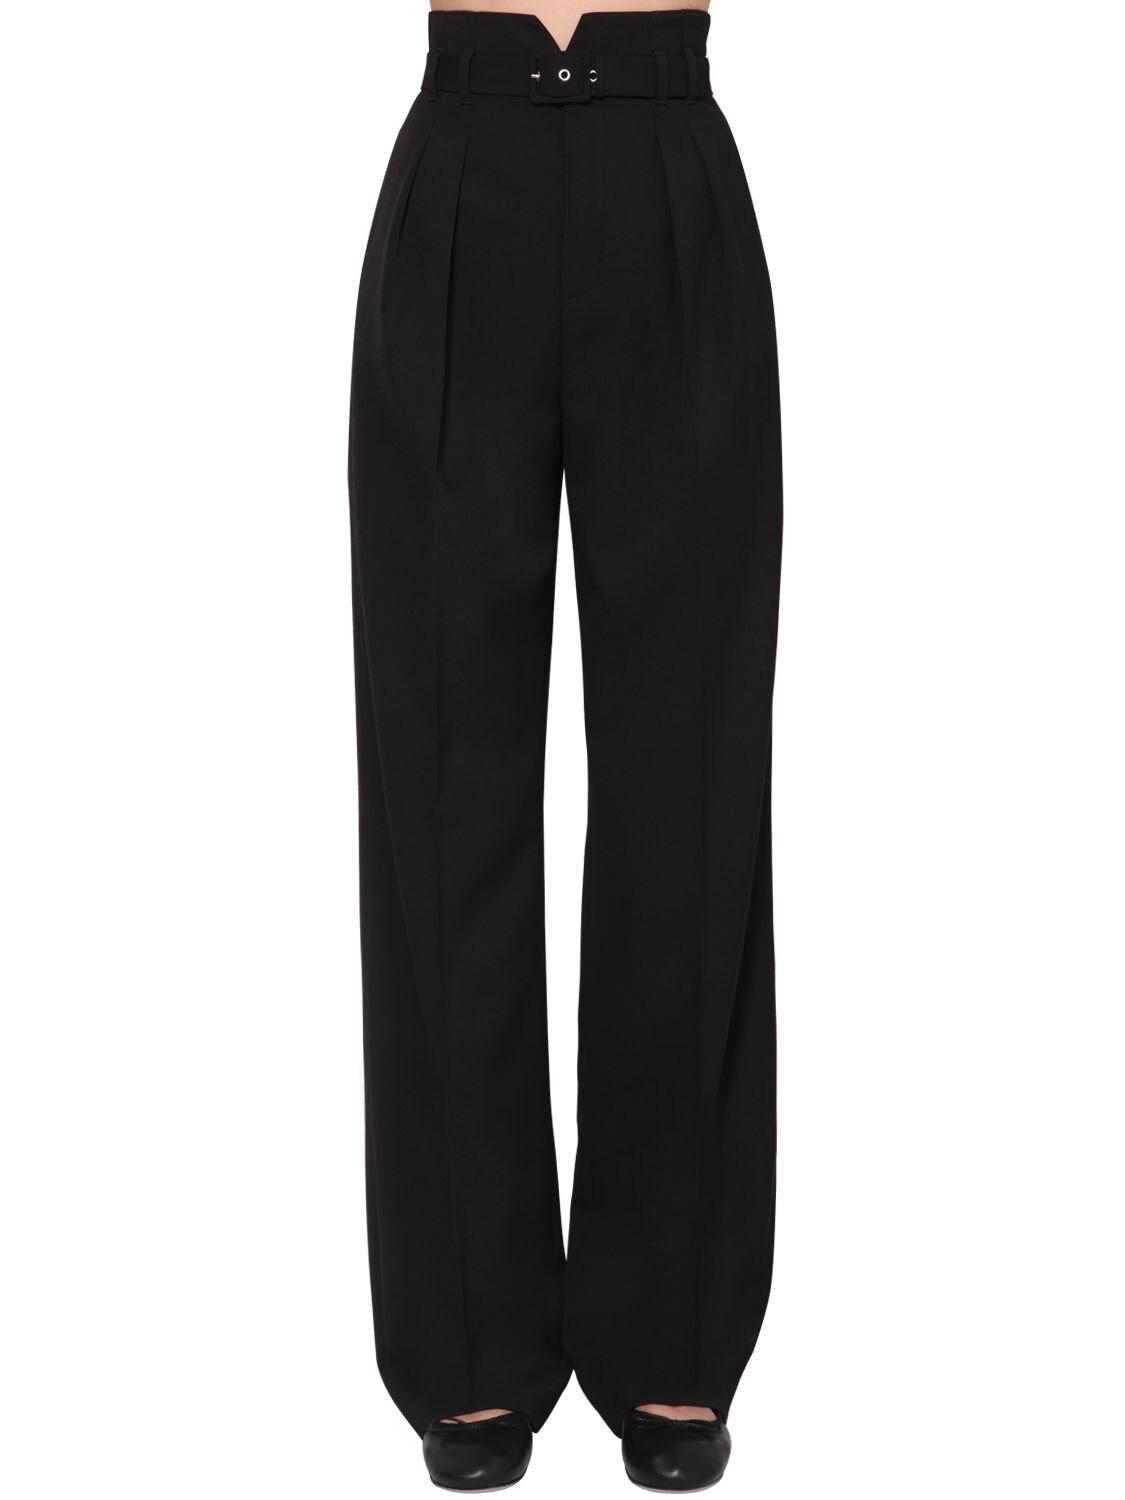 RED VALENTINO BELTED WIDE LEG WOOL BLEND PANTS,70IR1Z006-ME5P0